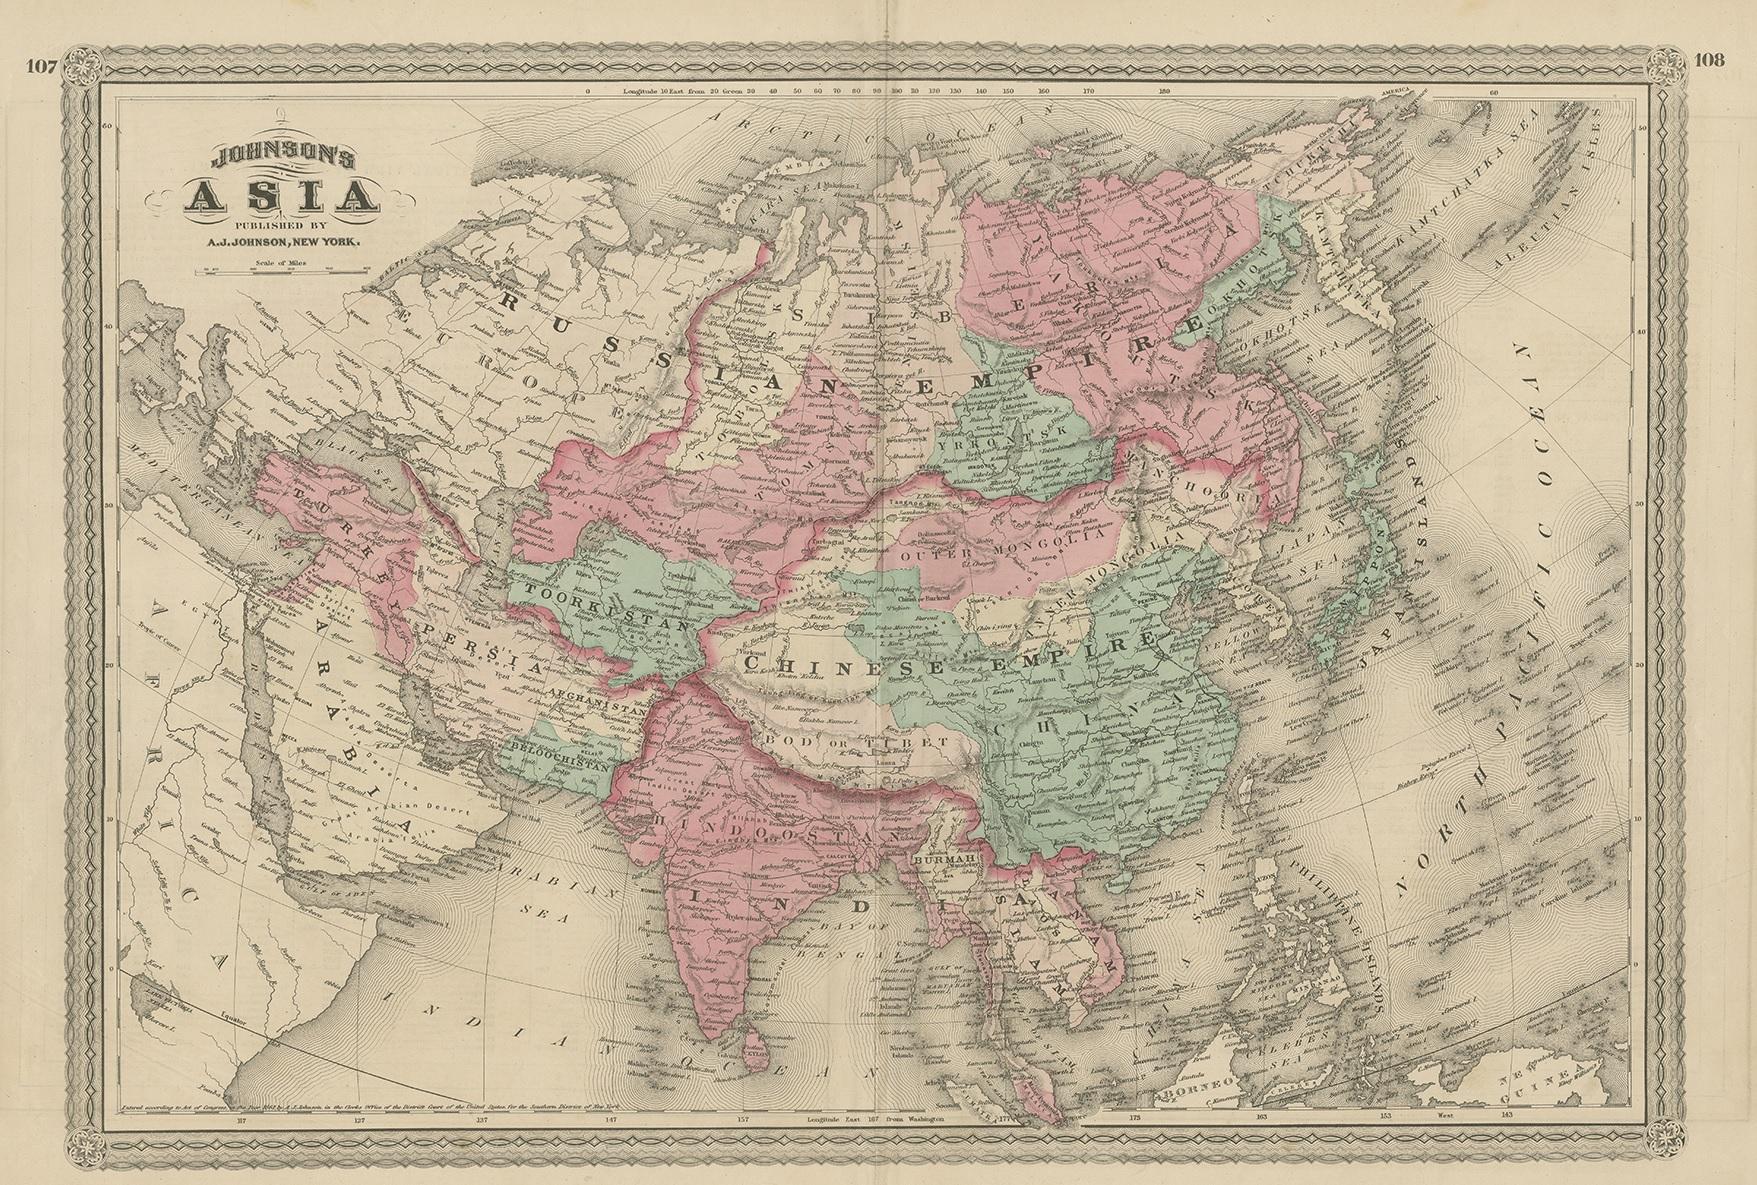 Antique map titled 'Johnson's Asia'. Original map of Asia. This map originates from 'Johnson's New Illustrated Family Atlas of the World' by A.J. Johnson. Published, 1872.